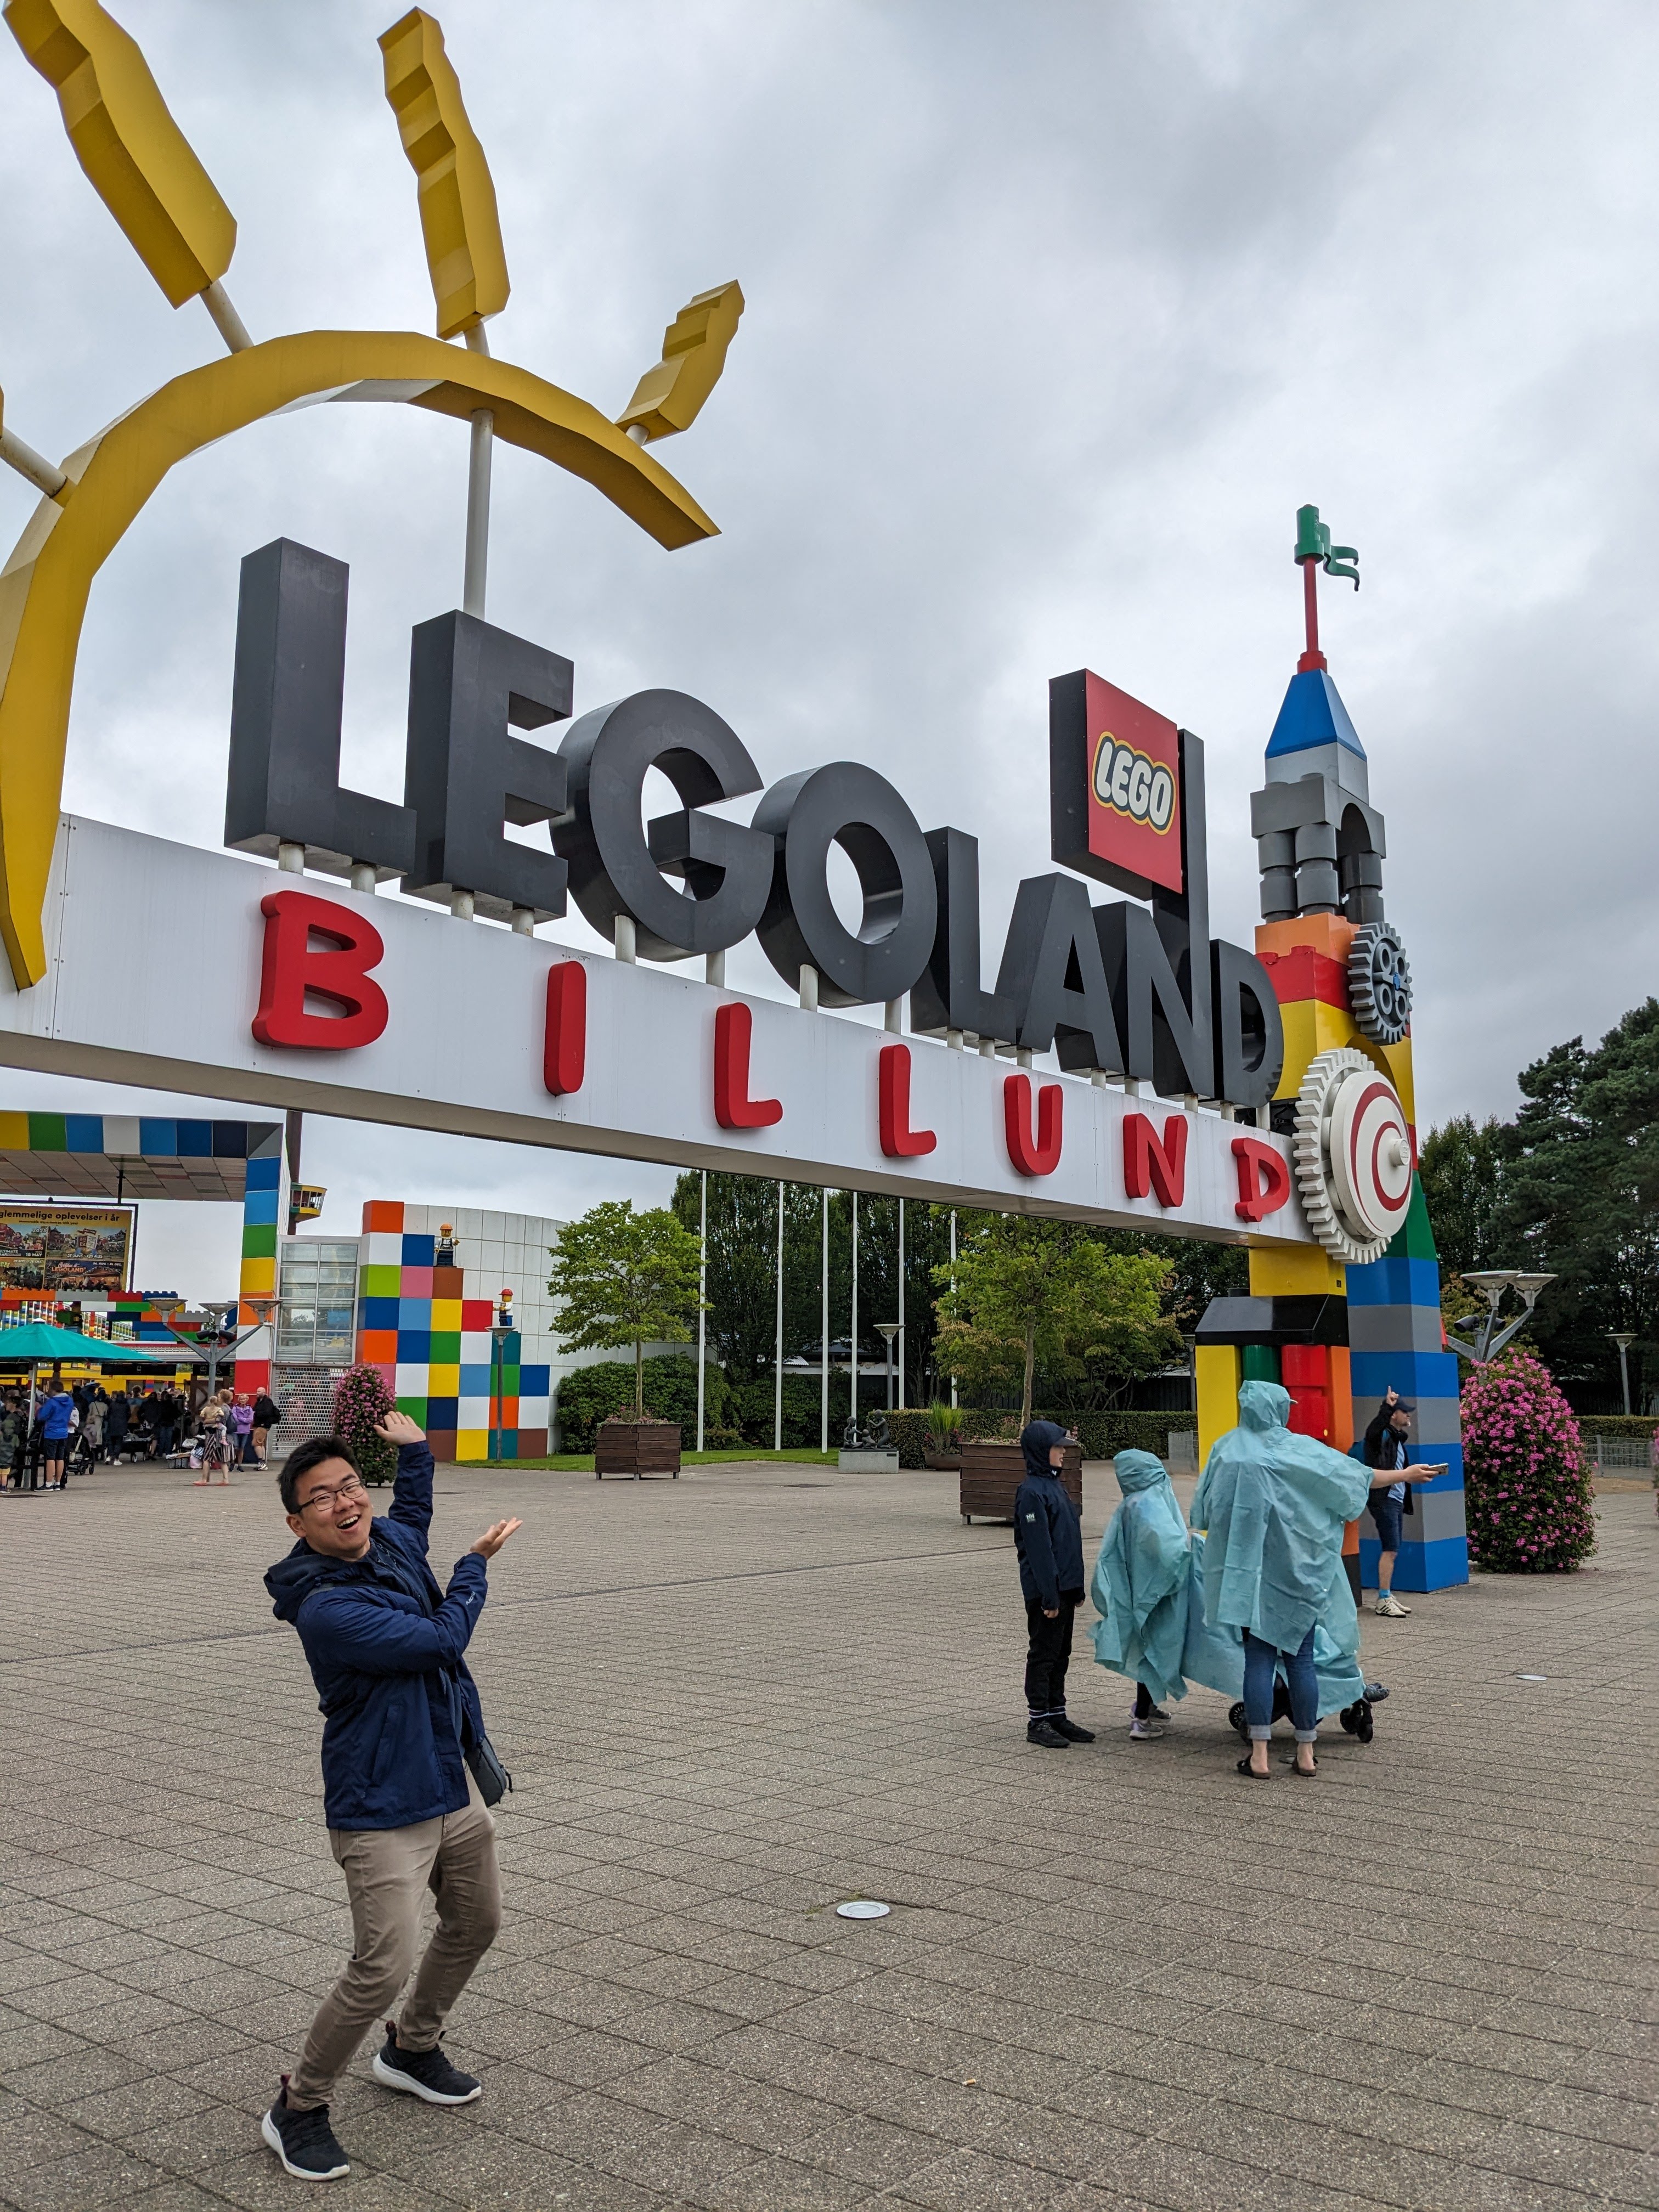 Me posing in front of the Legoland Billund sign